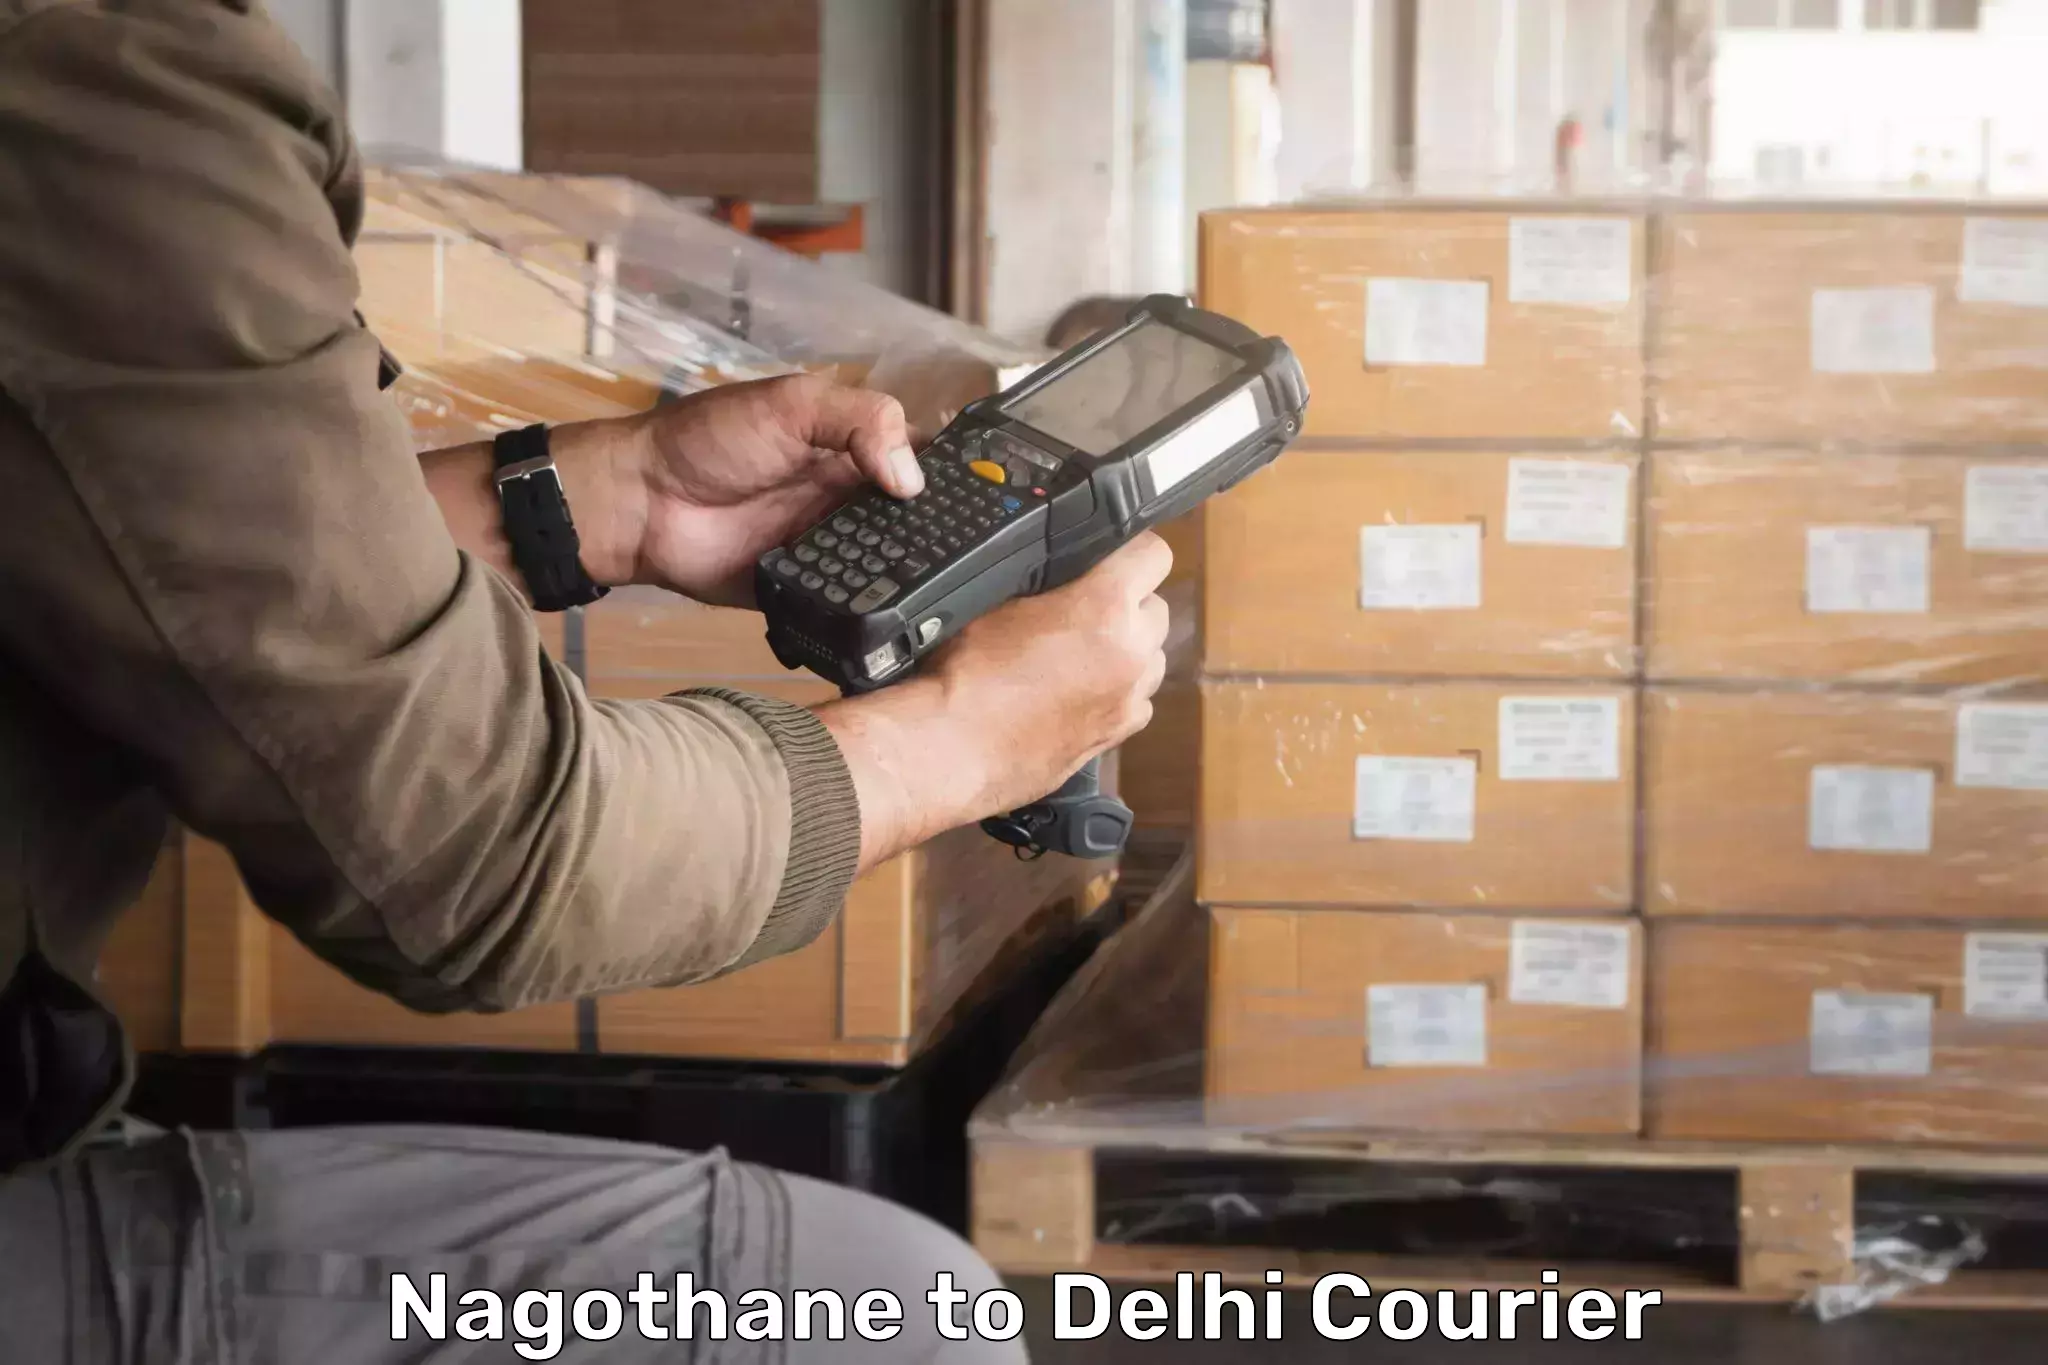 Large-scale shipping solutions Nagothane to NCR